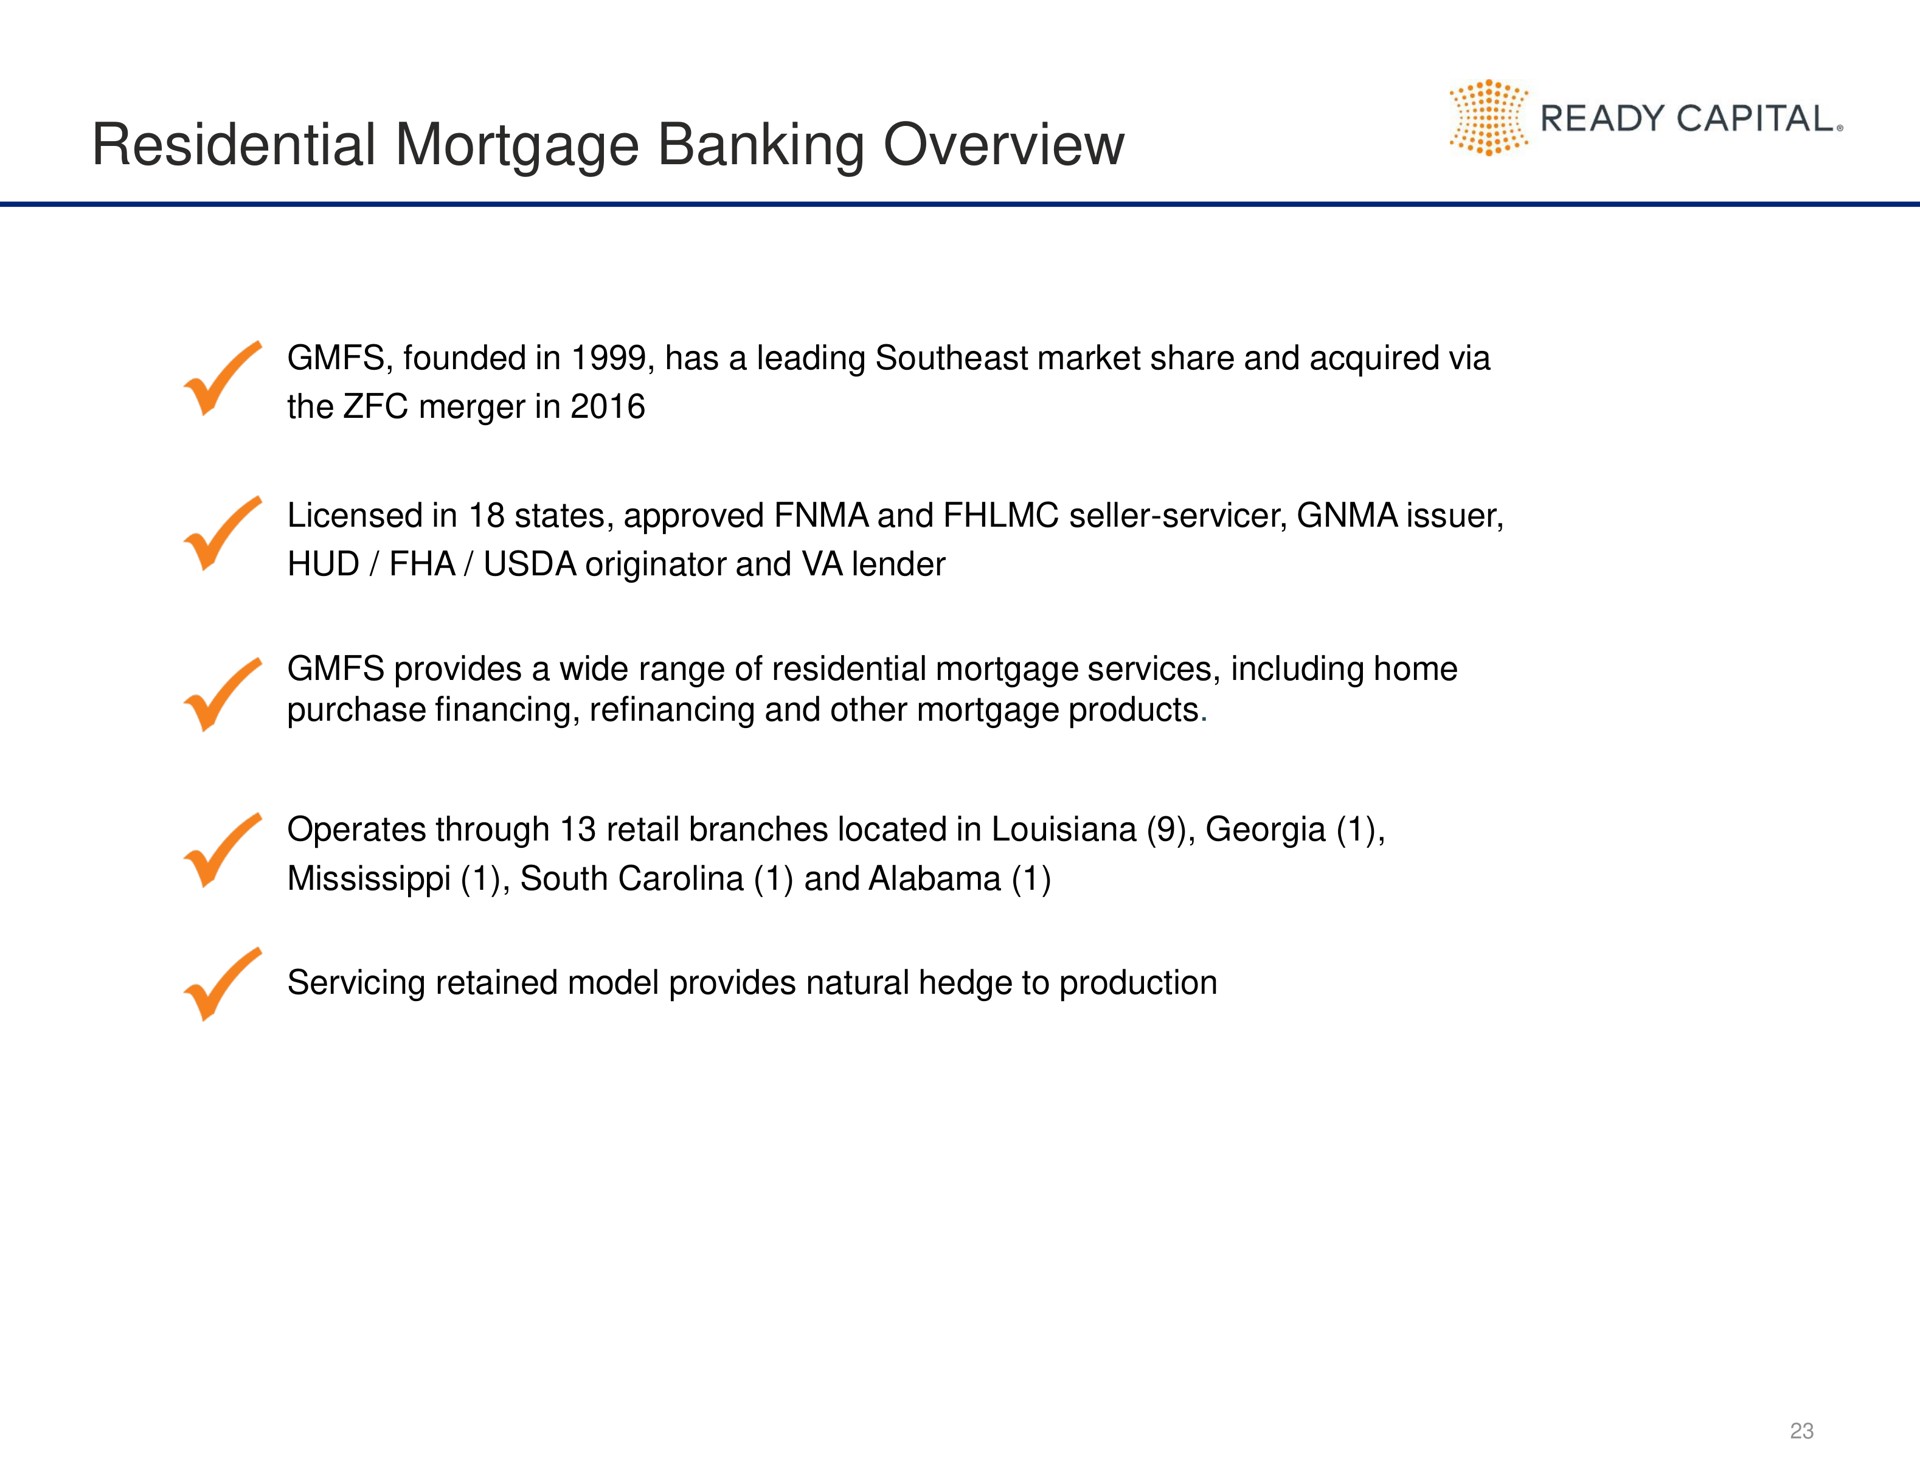 residential mortgage banking overview bead capital | Ready Capital